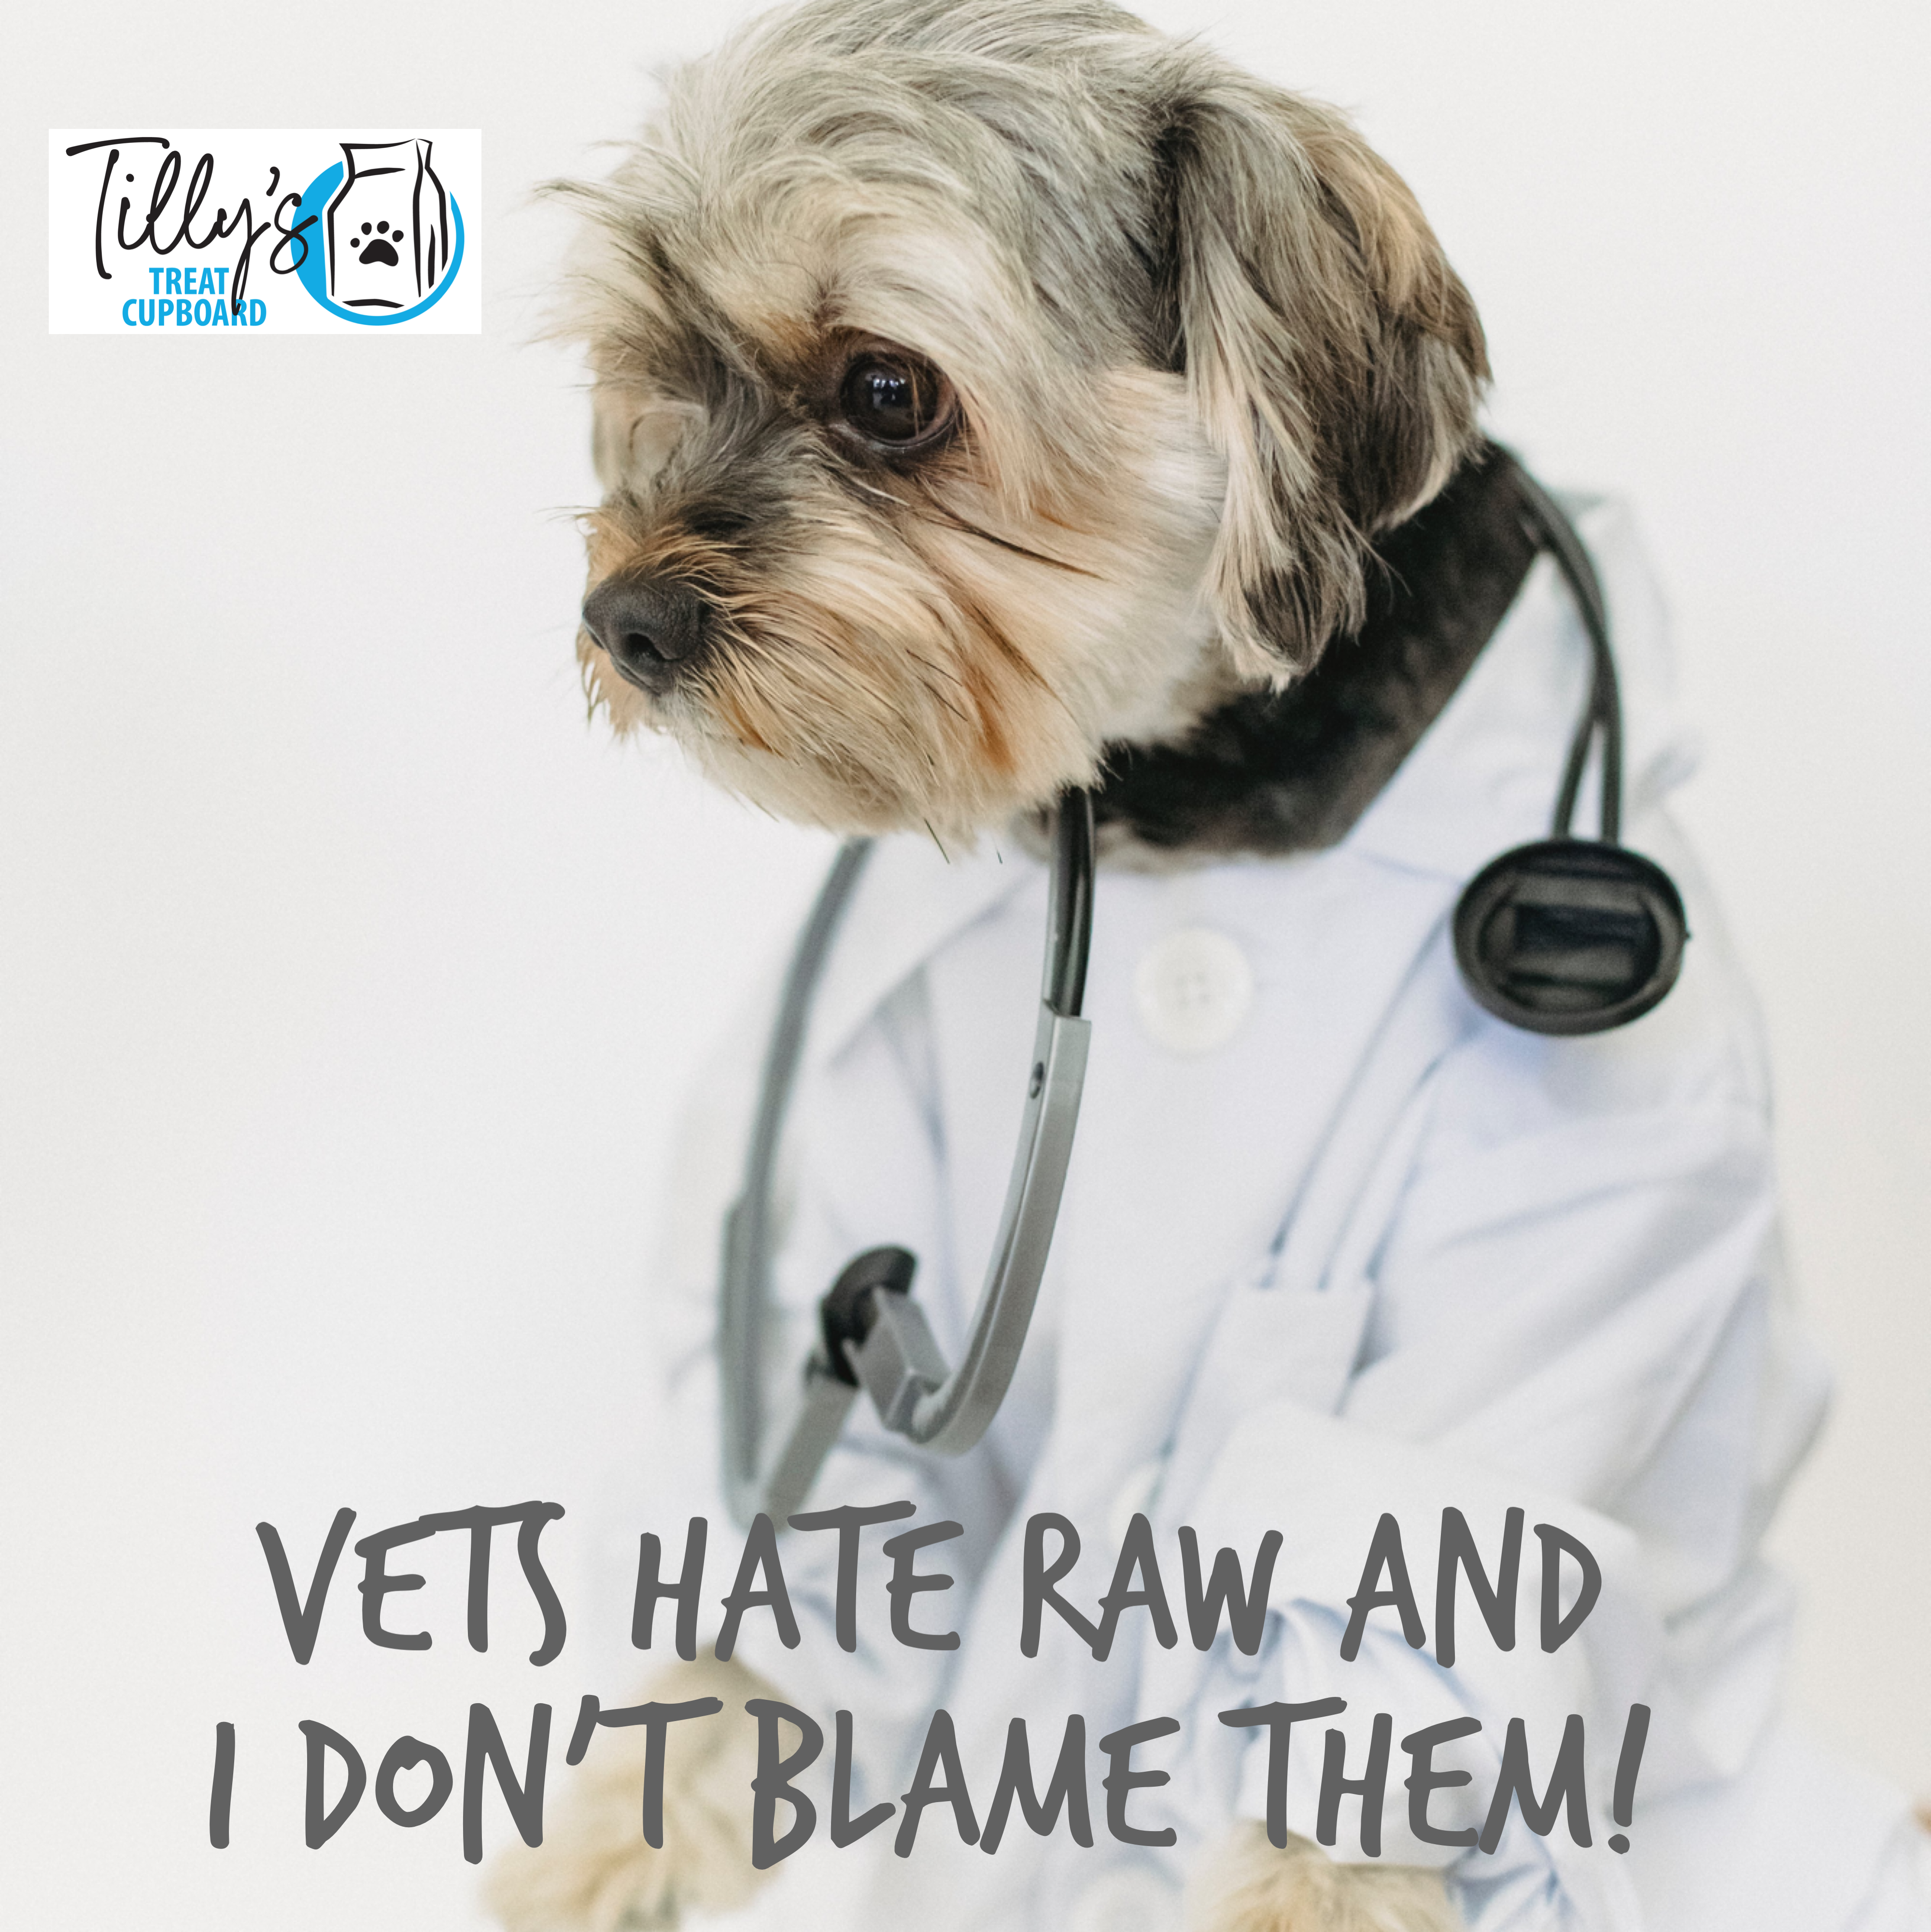 Vets Hate Raw And I Don't Blame Them!